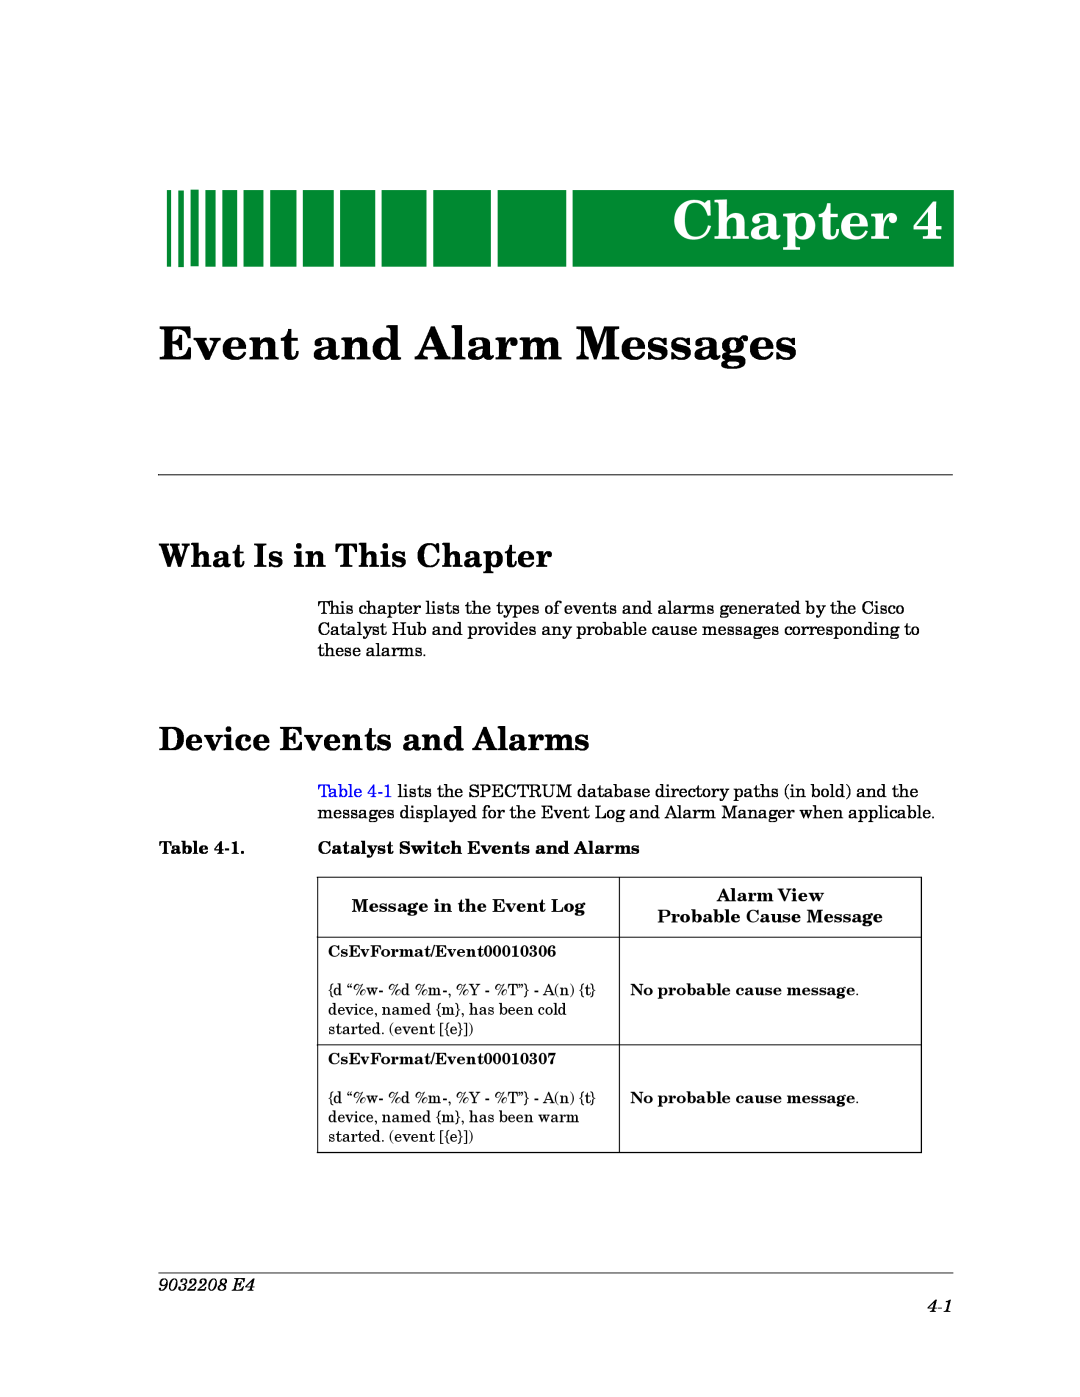 Cabletron Systems 5000, 5500 Event and Alarm Messages, Device Events and Alarms, 1. Catalyst Switch Events and Alarms 